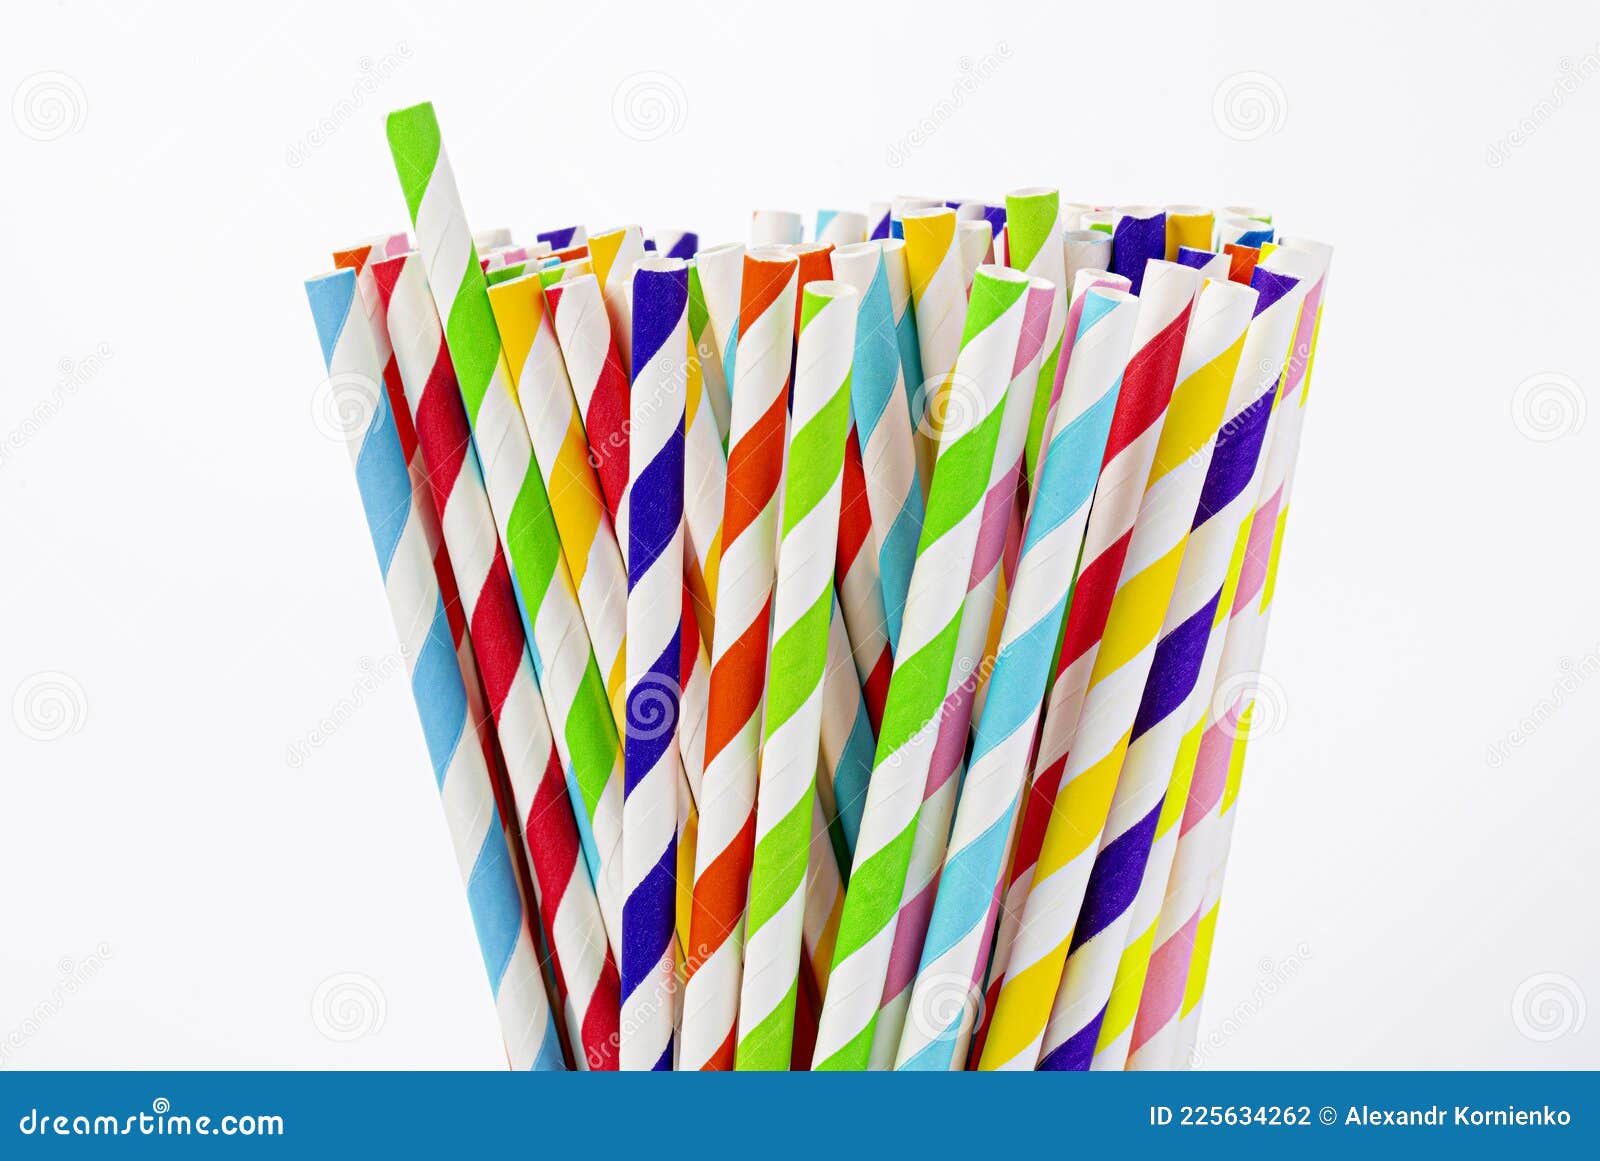 paper straw of different colors